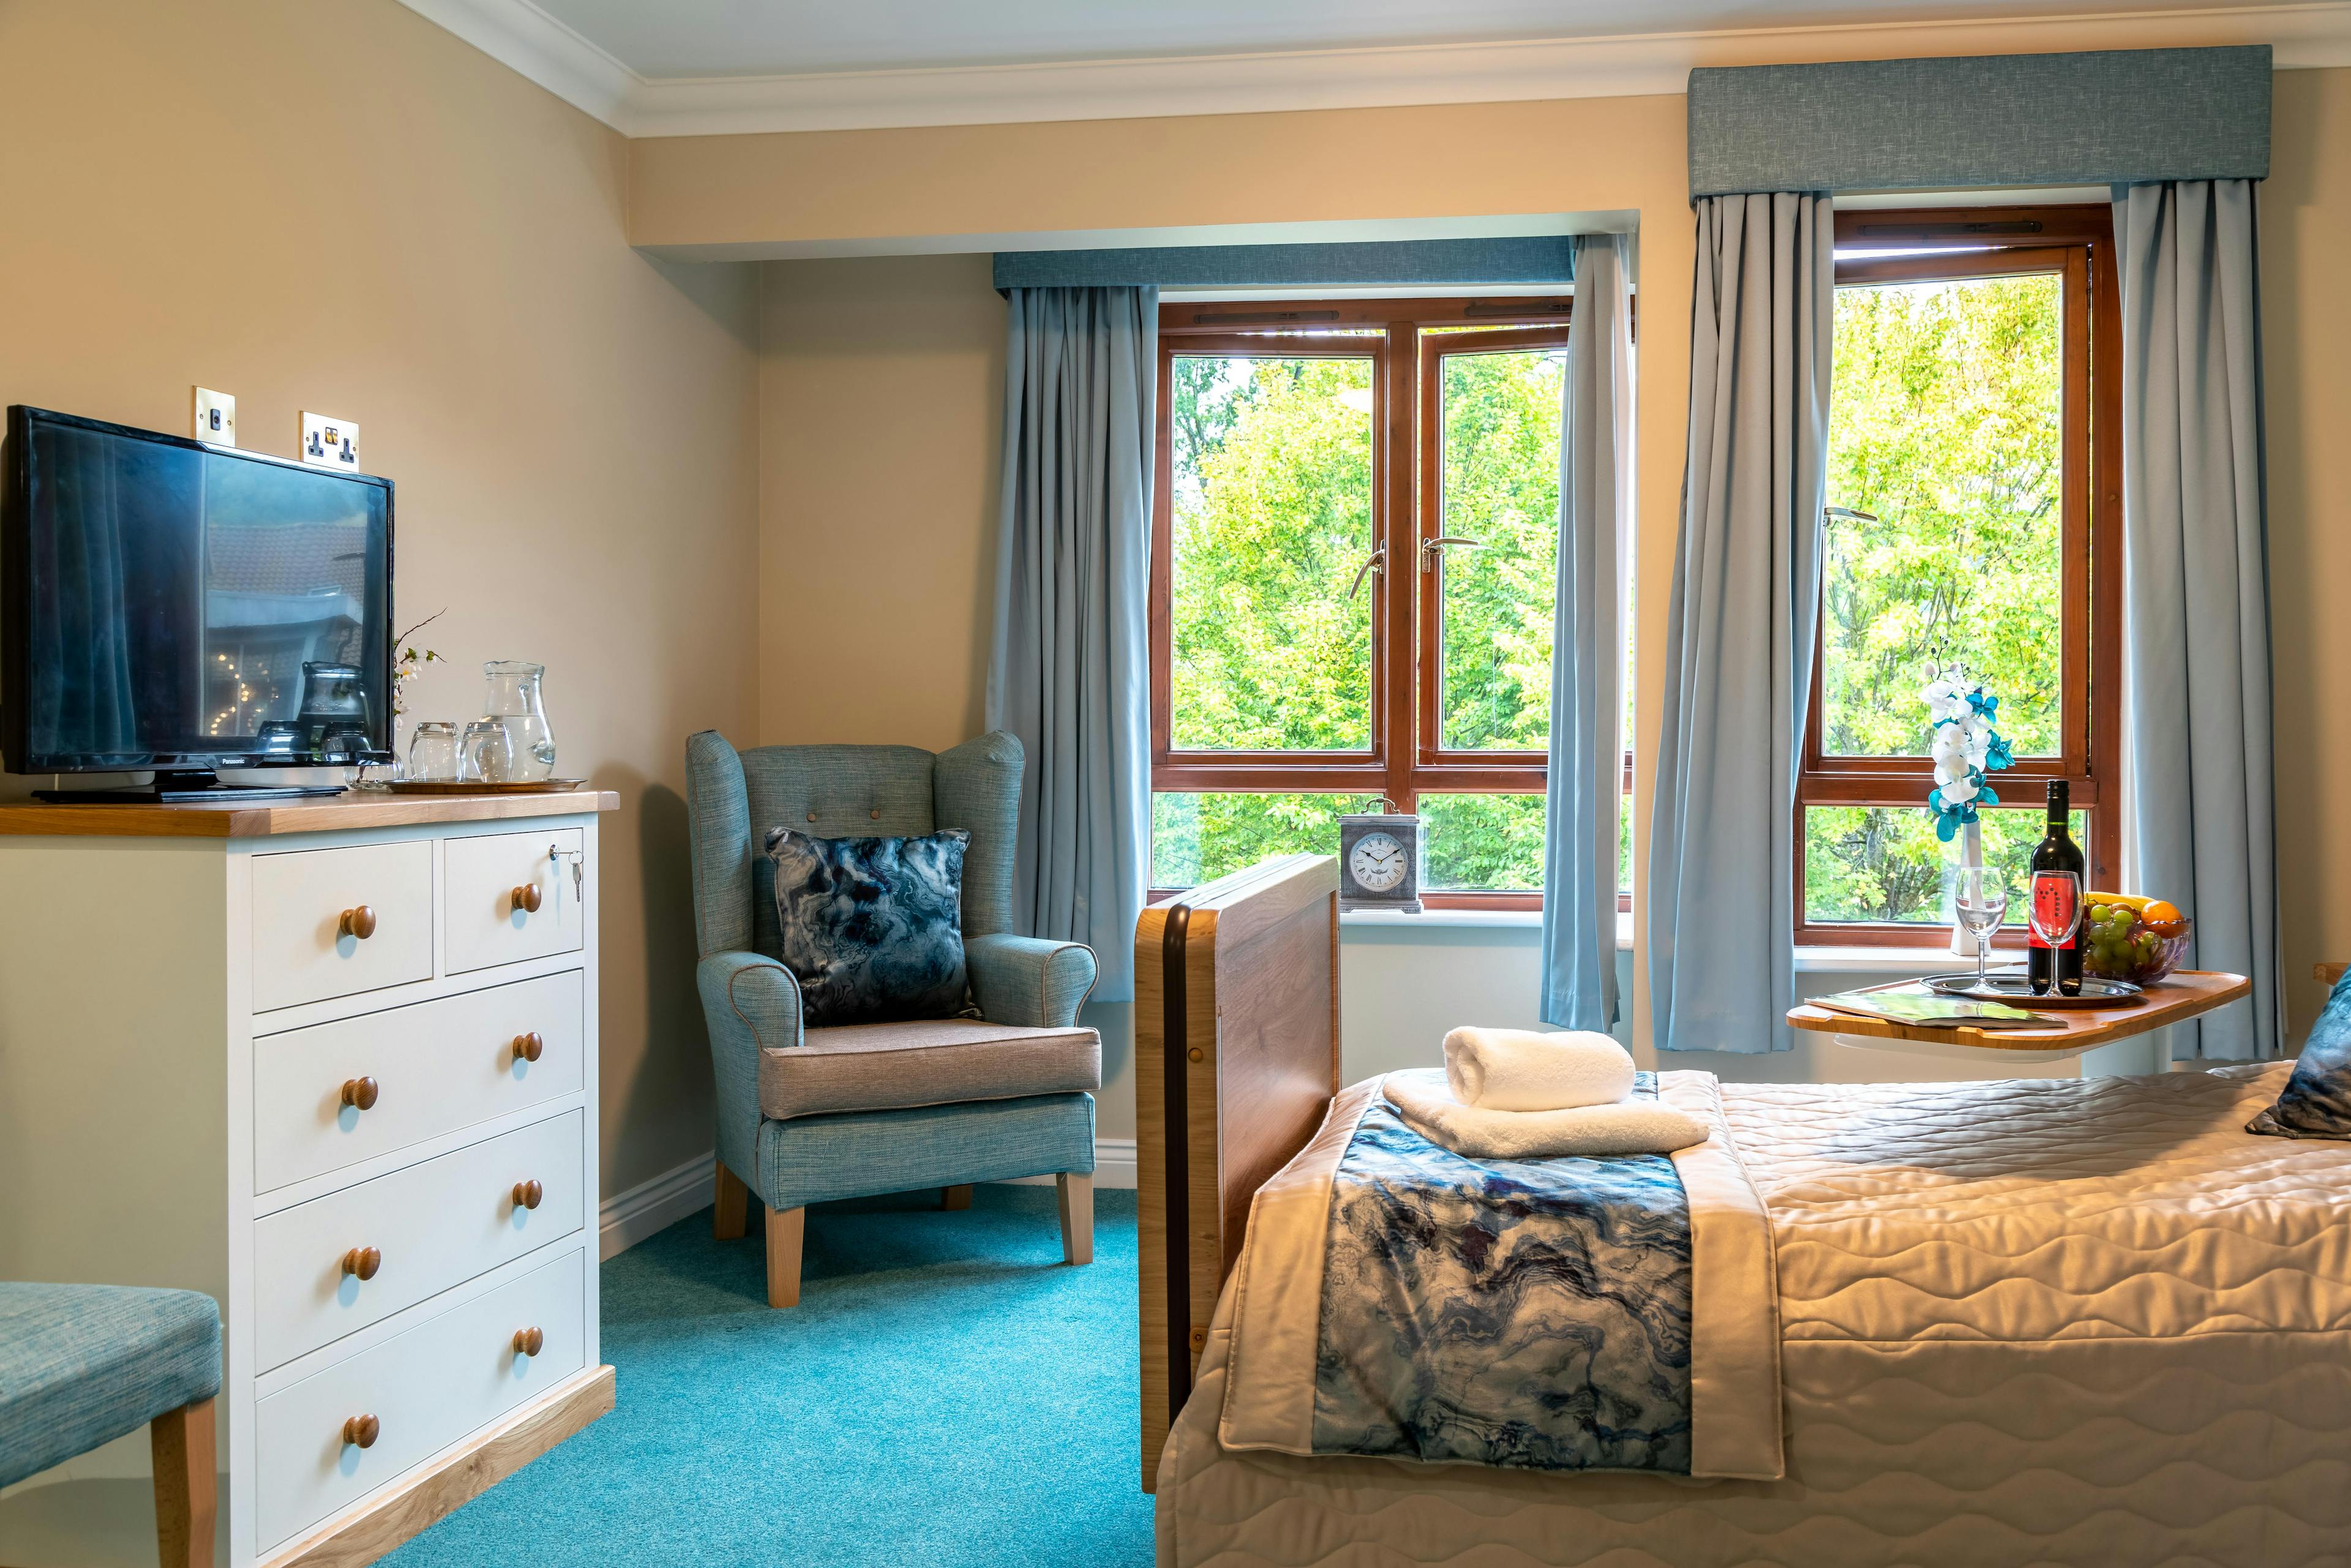 Bedroom at Tandridge Heights Care Home in Oxted, Surrey